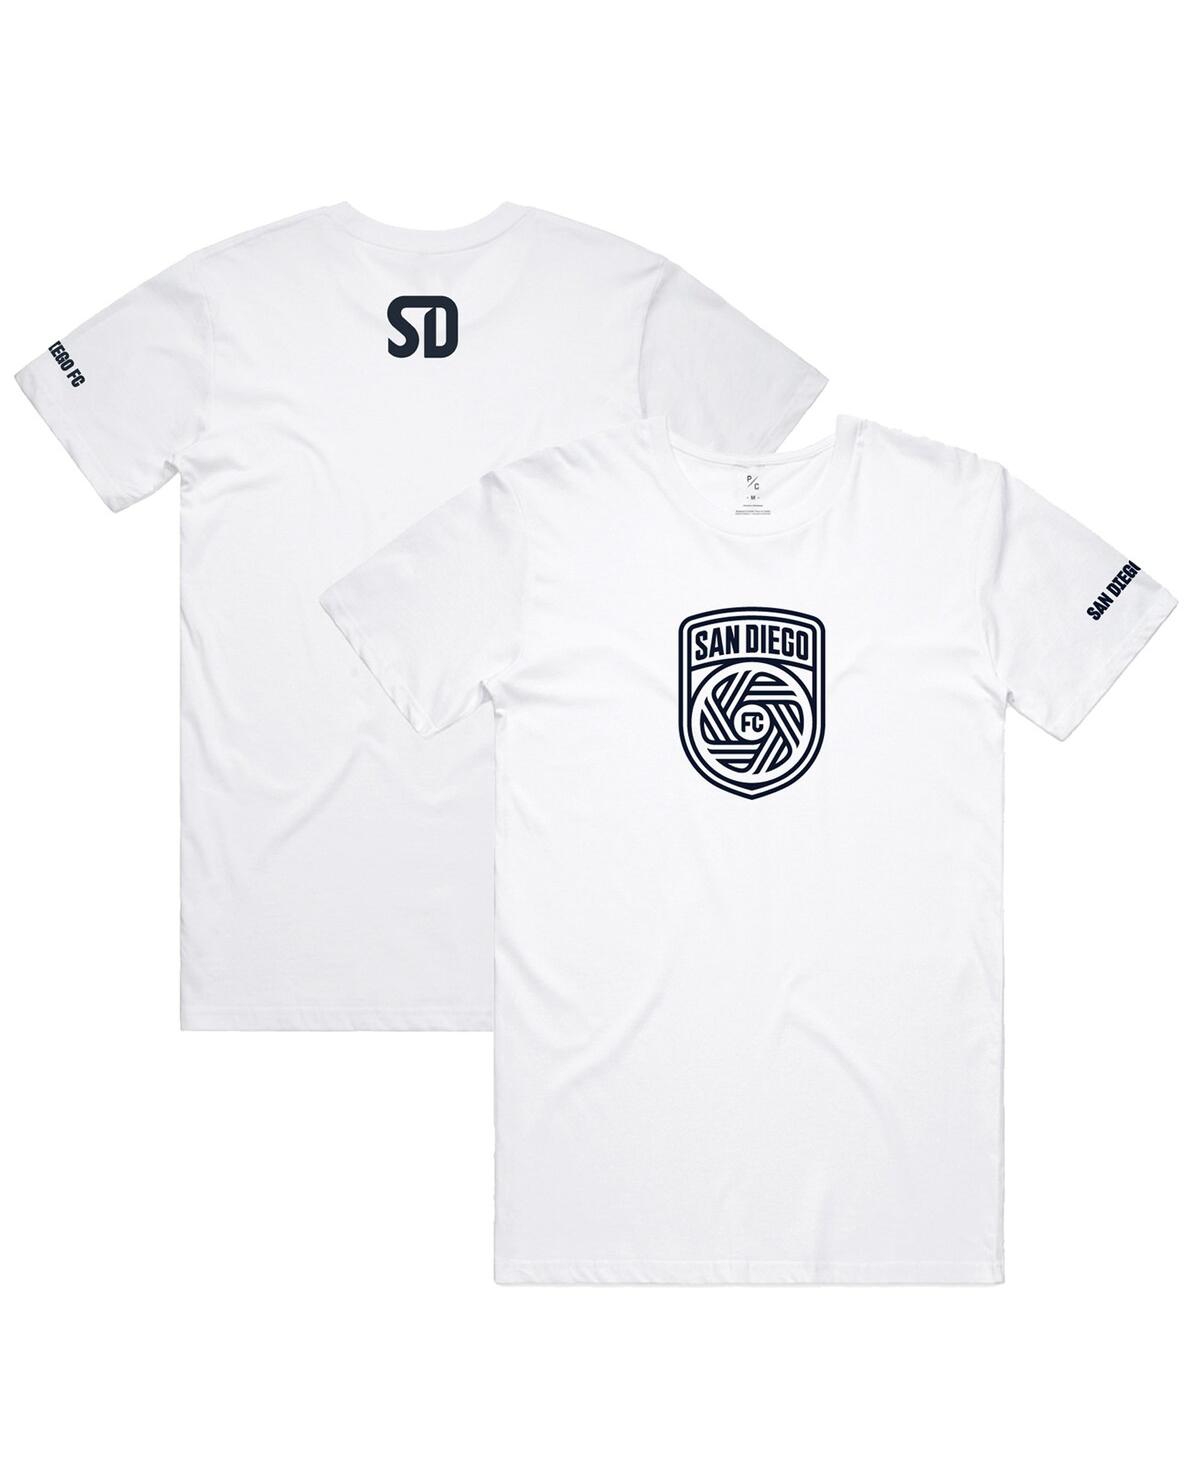 Men's and Women's Peace Collective White San Diego Fc Monochrome T-shirt - White